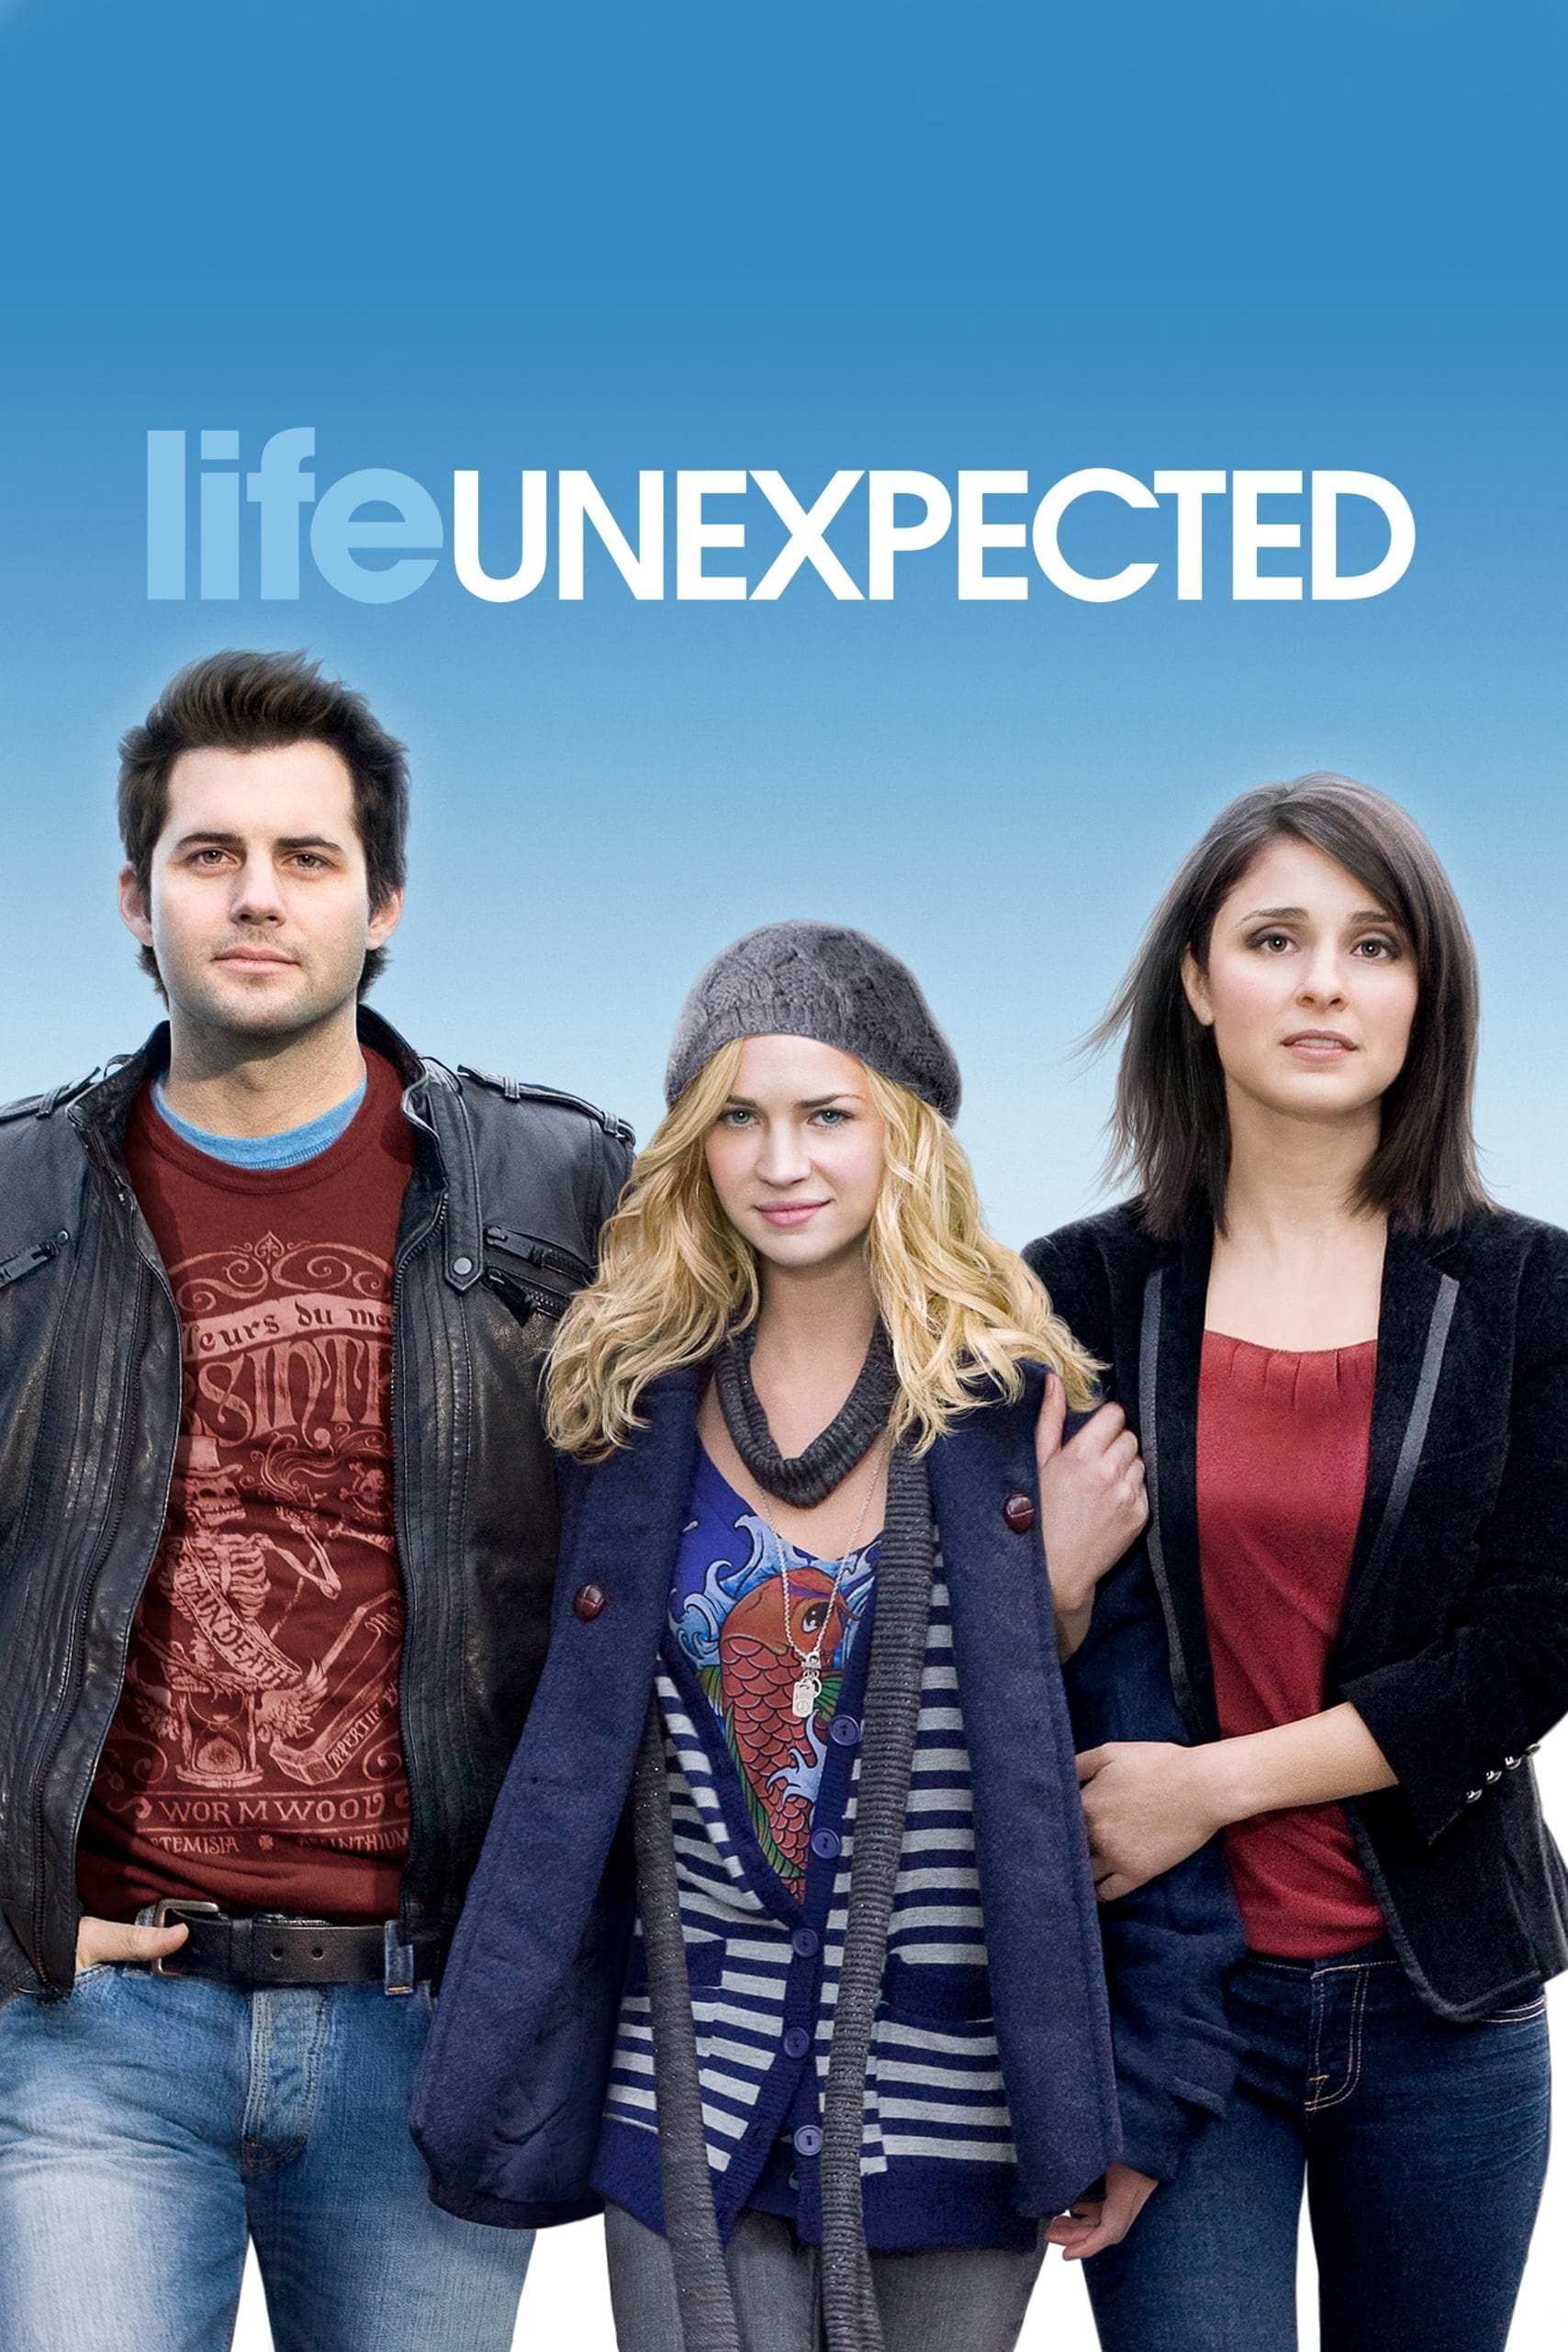 Life Unexpected (2010)